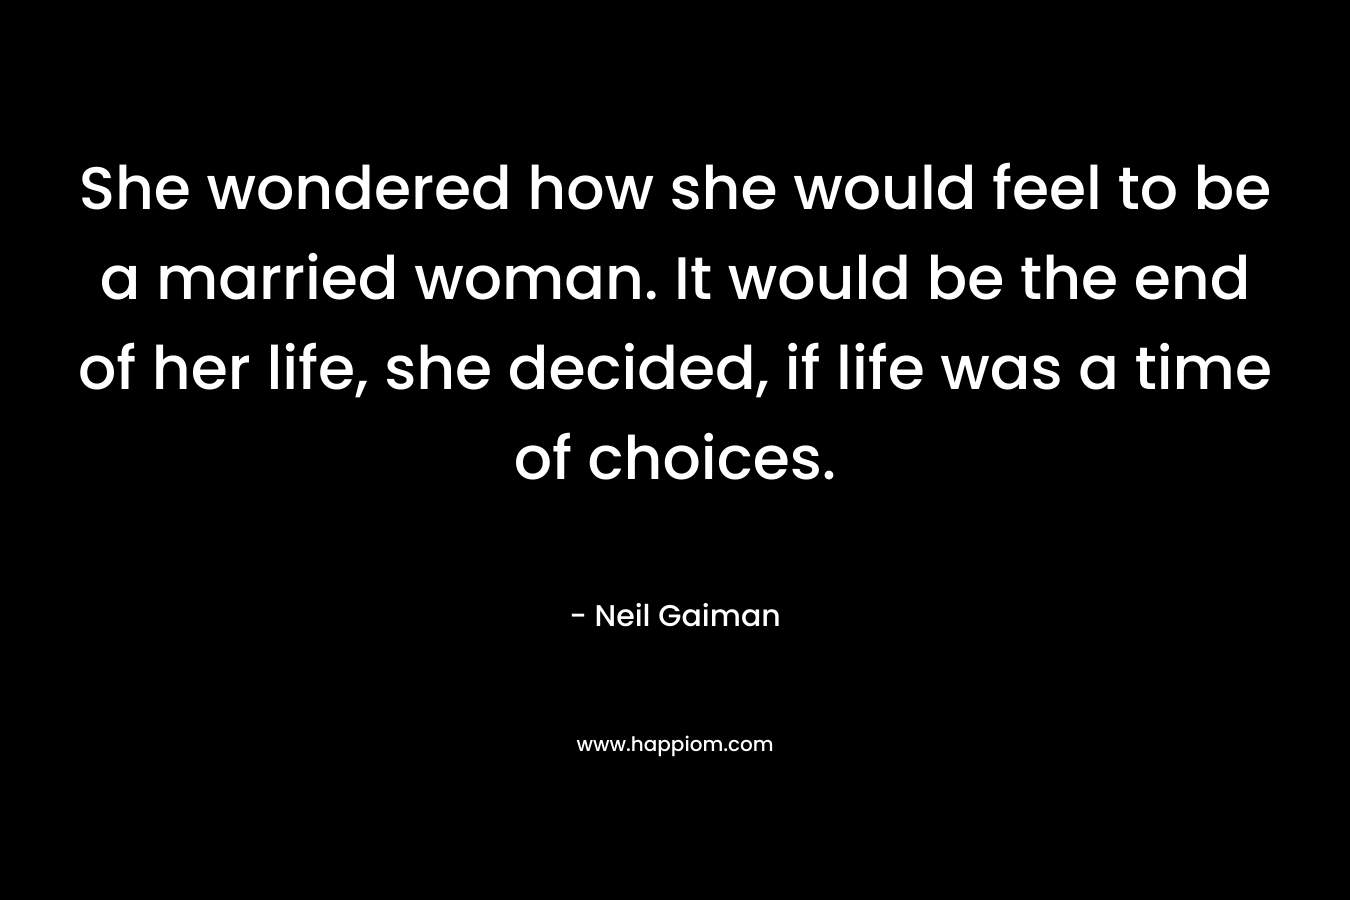 She wondered how she would feel to be a married woman. It would be the end of her life, she decided, if life was a time of choices.